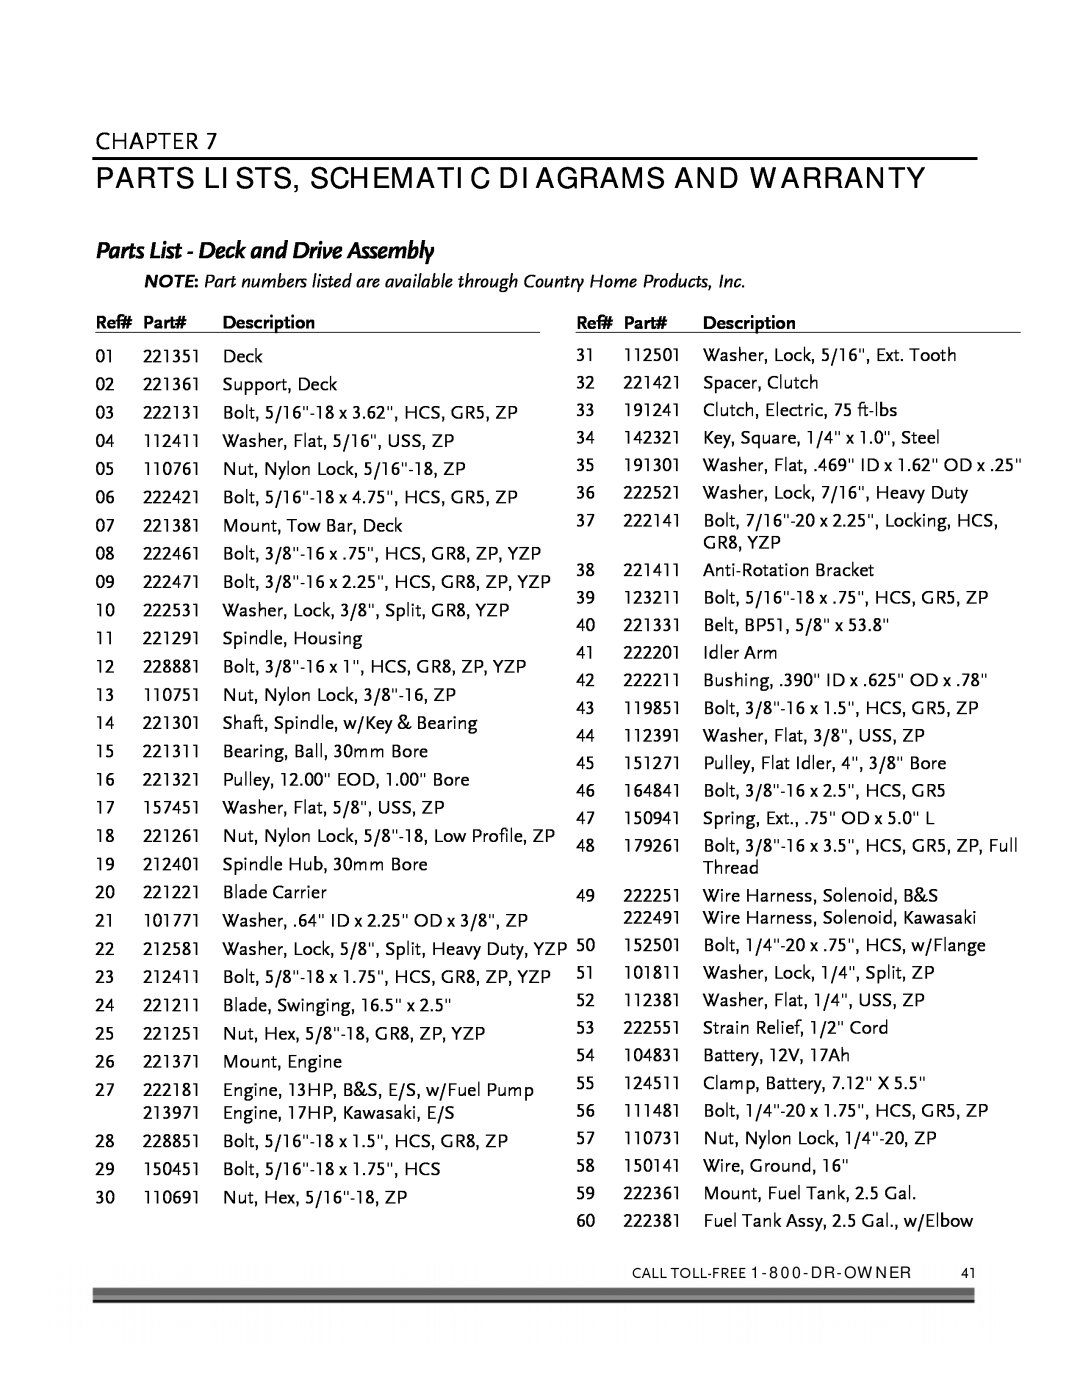 Briggs & Stratton FIELD and BRUSH MOWER Parts Lists, Schematic Diagrams And Warranty, Parts List - Deck and Drive Assembly 